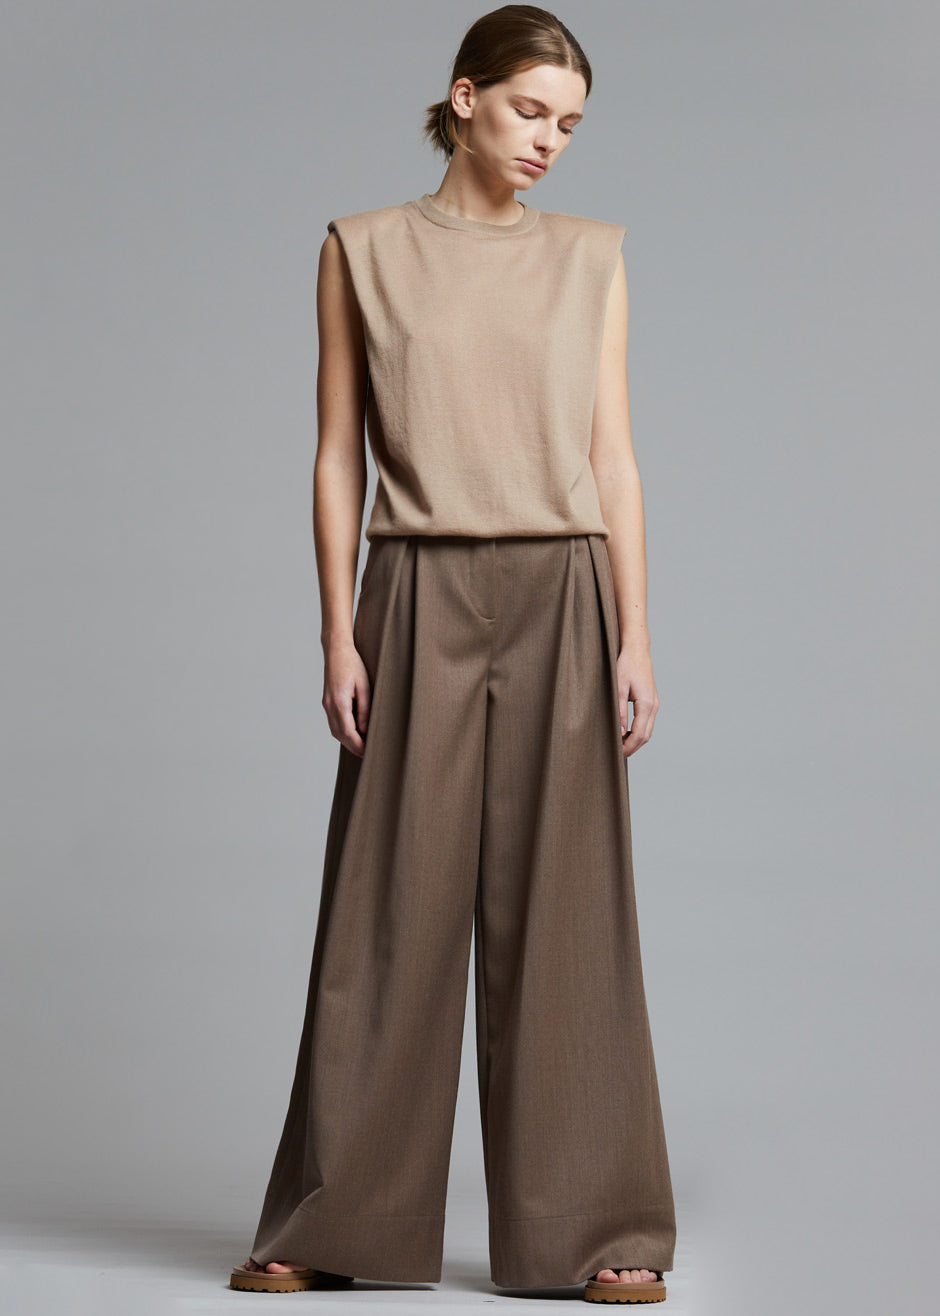 Equus Pants by The Garment in Taupe - 3